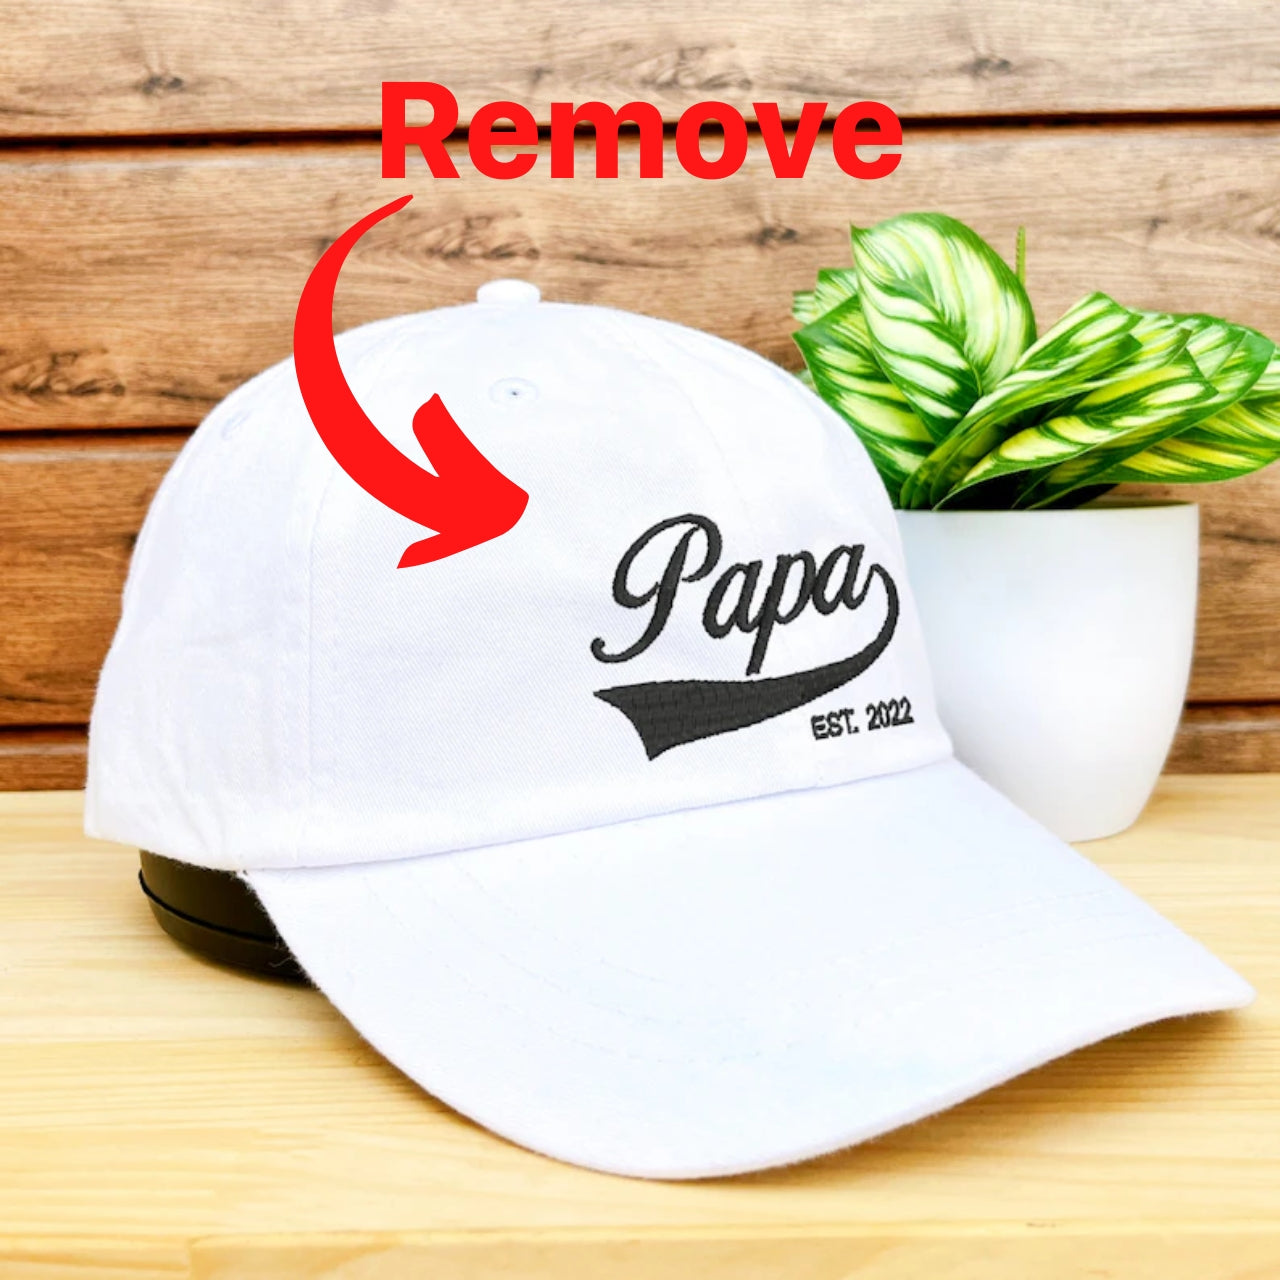 How to remove embroidery from hat?